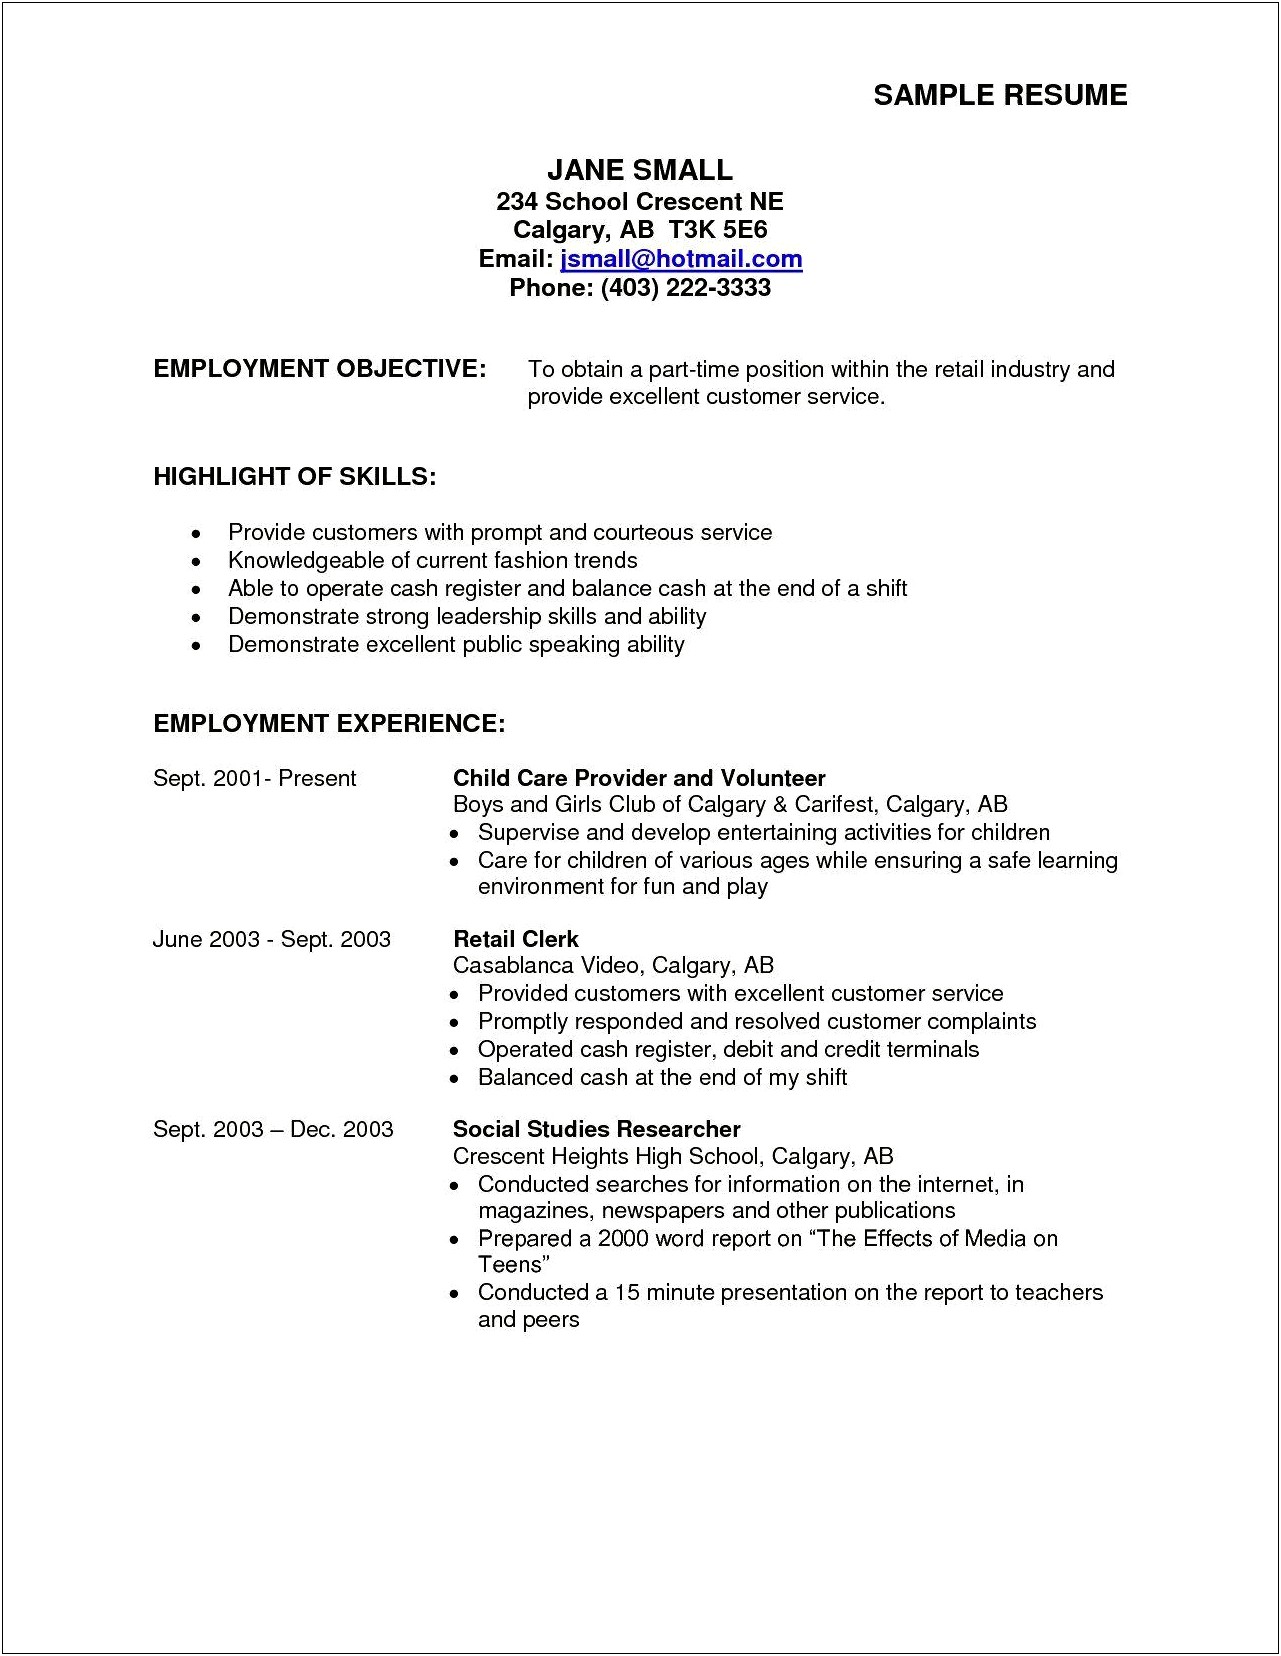 Resume Objective For Part Time College Student